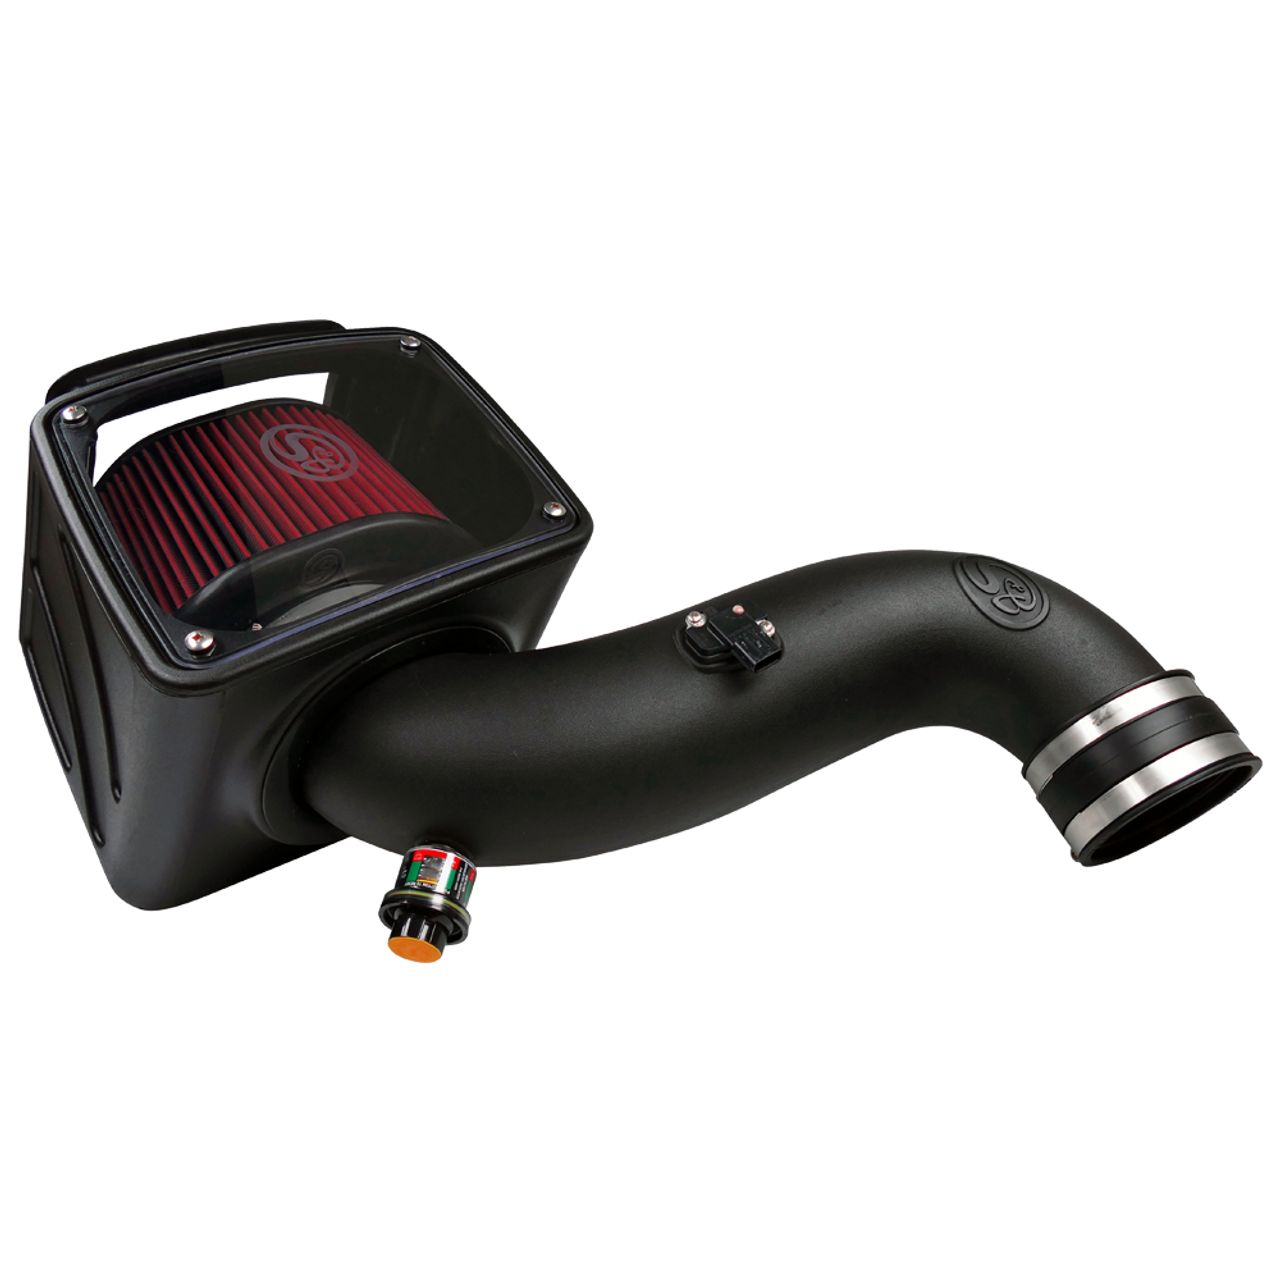 Oiled Cleanable, 8-ply Cotton Filter S&B Filters 75-5021 Cold Air Intake for 2007-2008 Silverado/Sierra 1500 4.8/5.3/6.0L